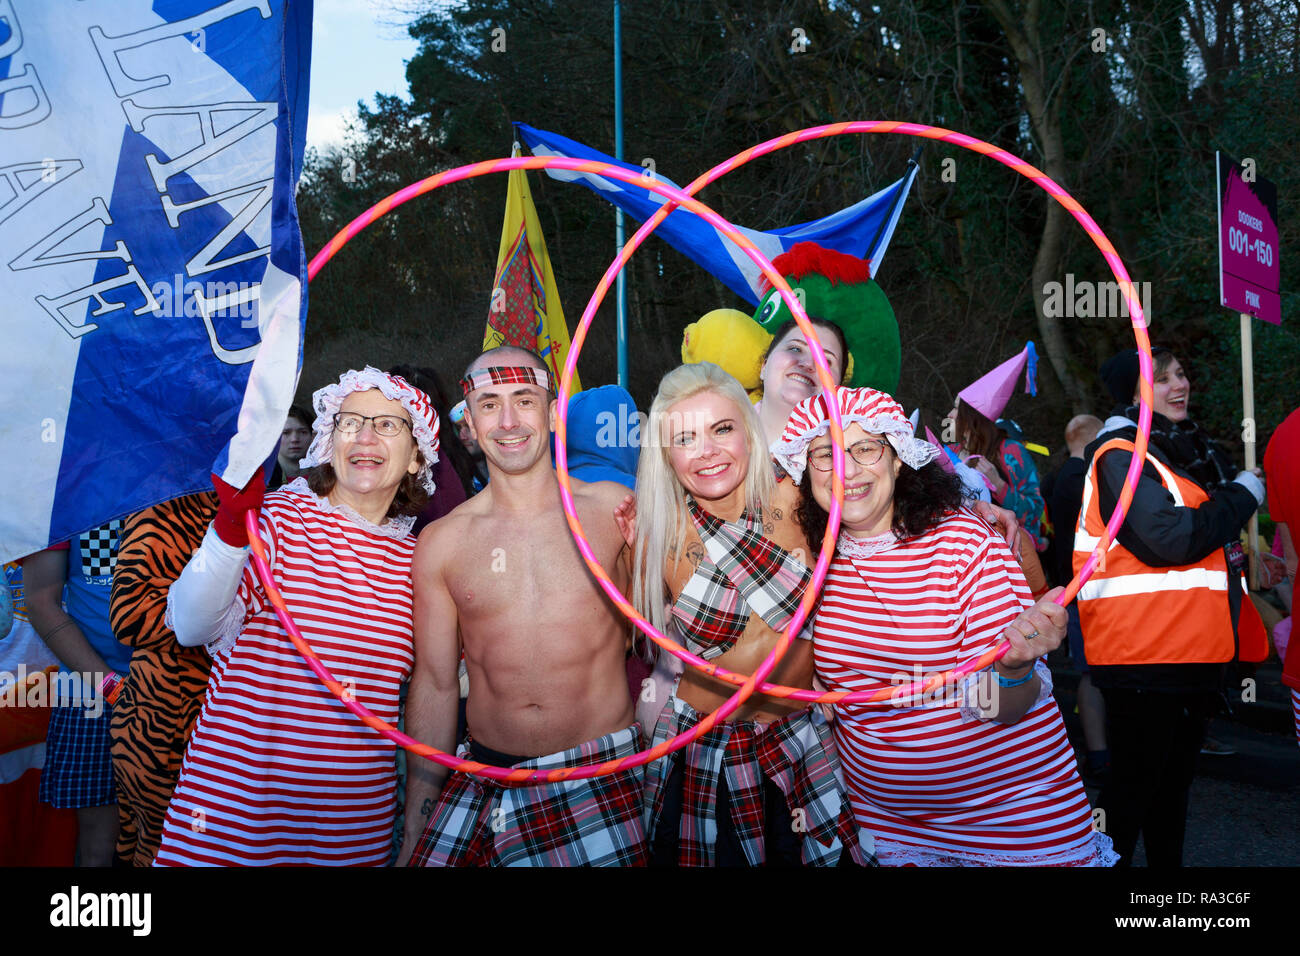 South Queensferry. Edinburgh. Scotland. 1st January 2019. UK.The Loony Dook continues its New Year’s Day tradition at Edinburgh’s Hogmanay. In the shadow of the Forth Bridges, the dippers in fancy dress raise money for charities. Dookers march the length of South Queensferry High Street led by The Noise Committee drummers as part of the Dookers' Parade. Edinburgh. Credit: Pako Mera/Alamy Live News Stock Photo